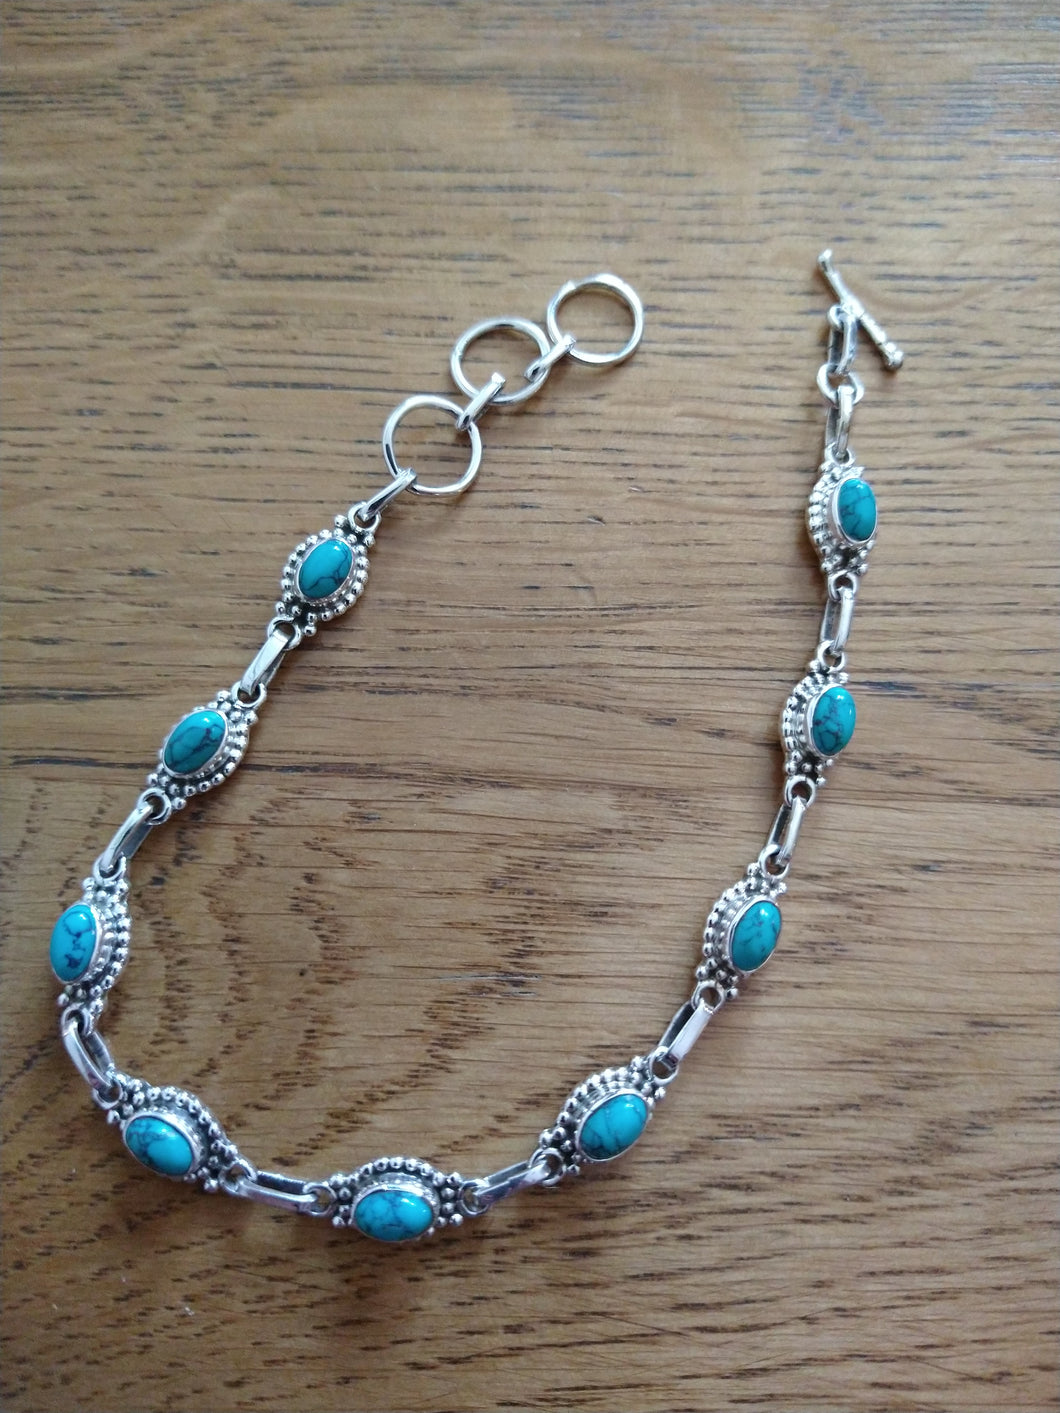 Turquoise Indian silver bracelet